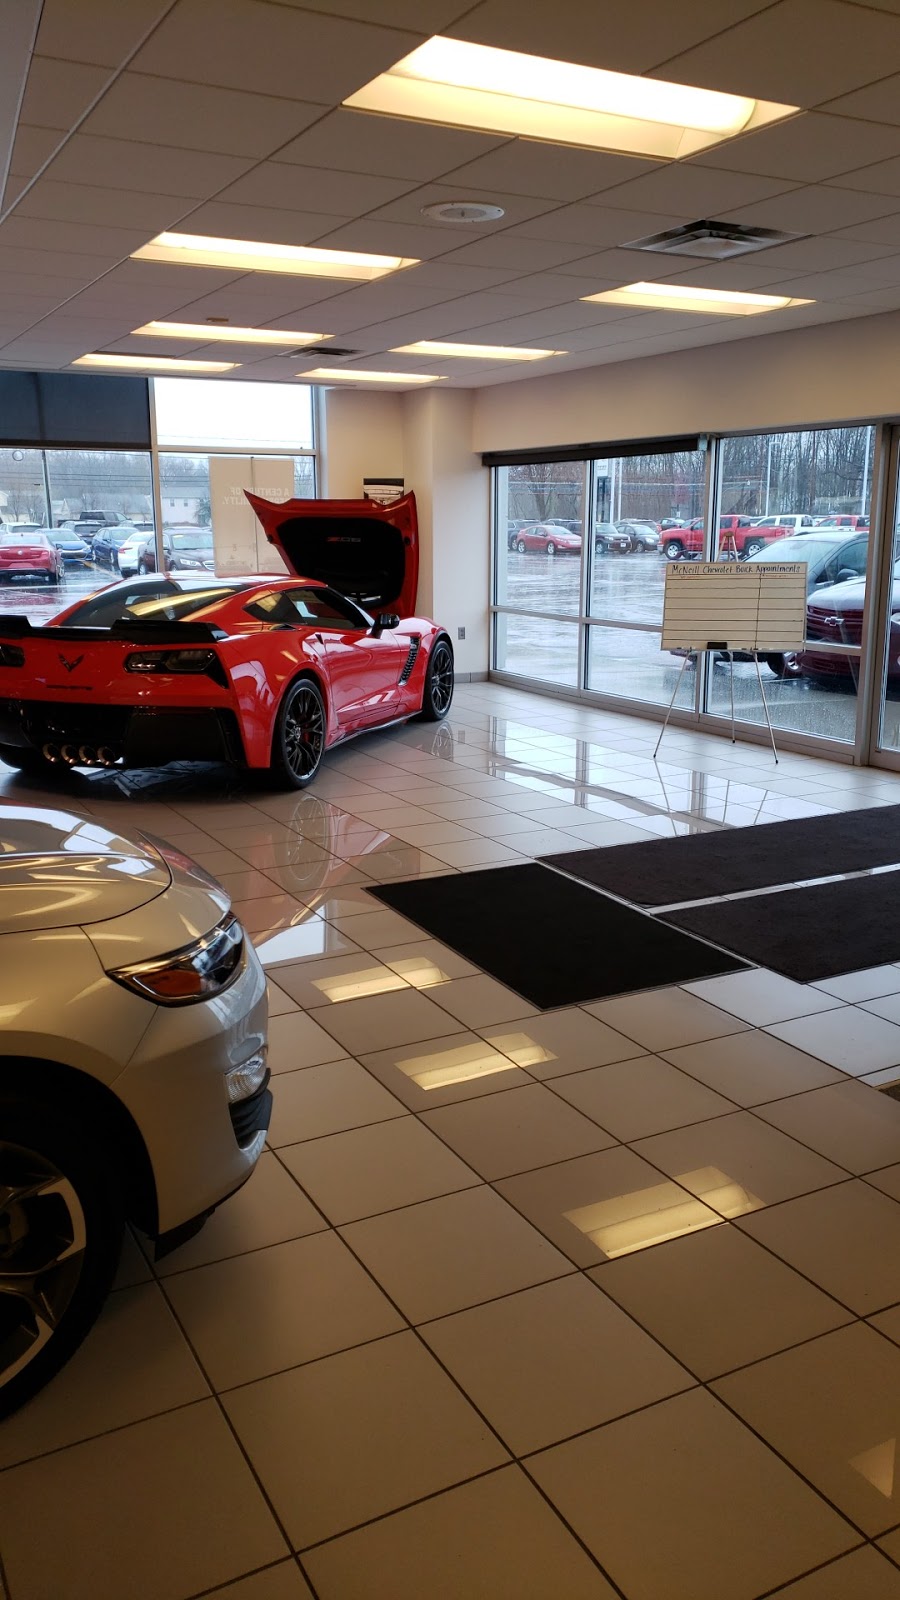 McNeill Chevrolet Buick | 220 W Airport Hwy, Swanton, OH 43558, USA | Phone: (419) 442-7840